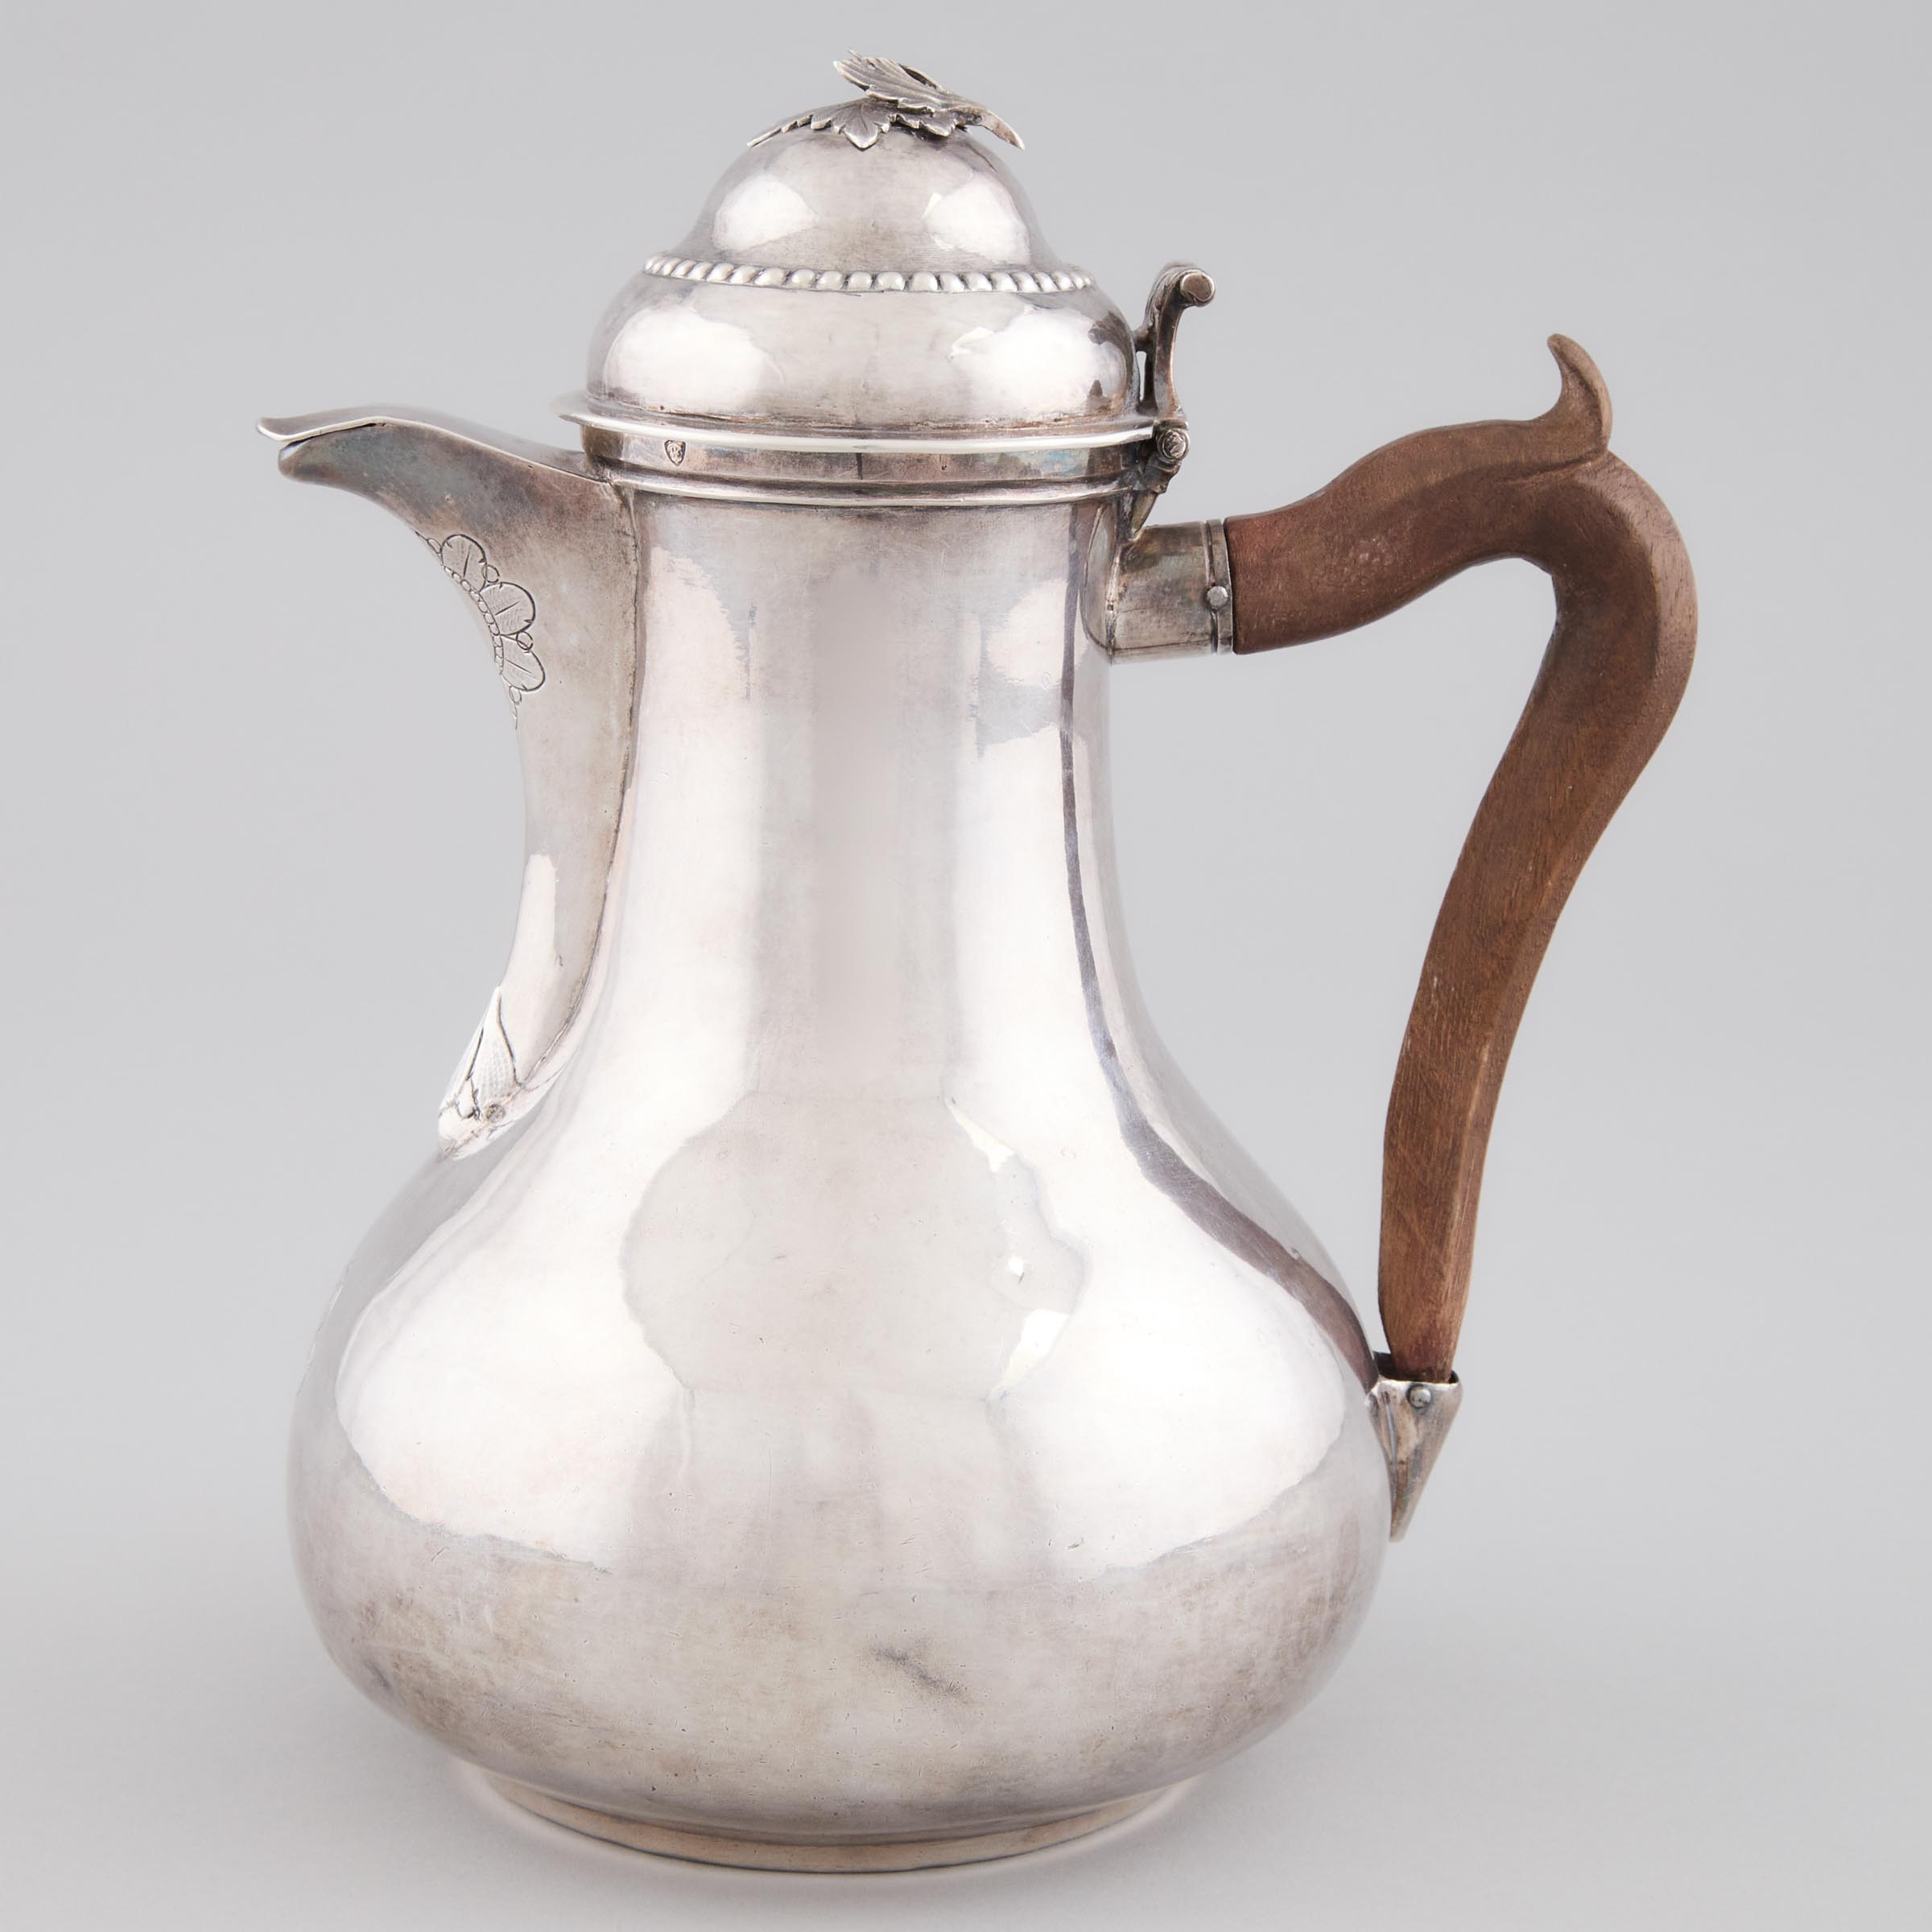 French Silver Hot Water Jug, possibly